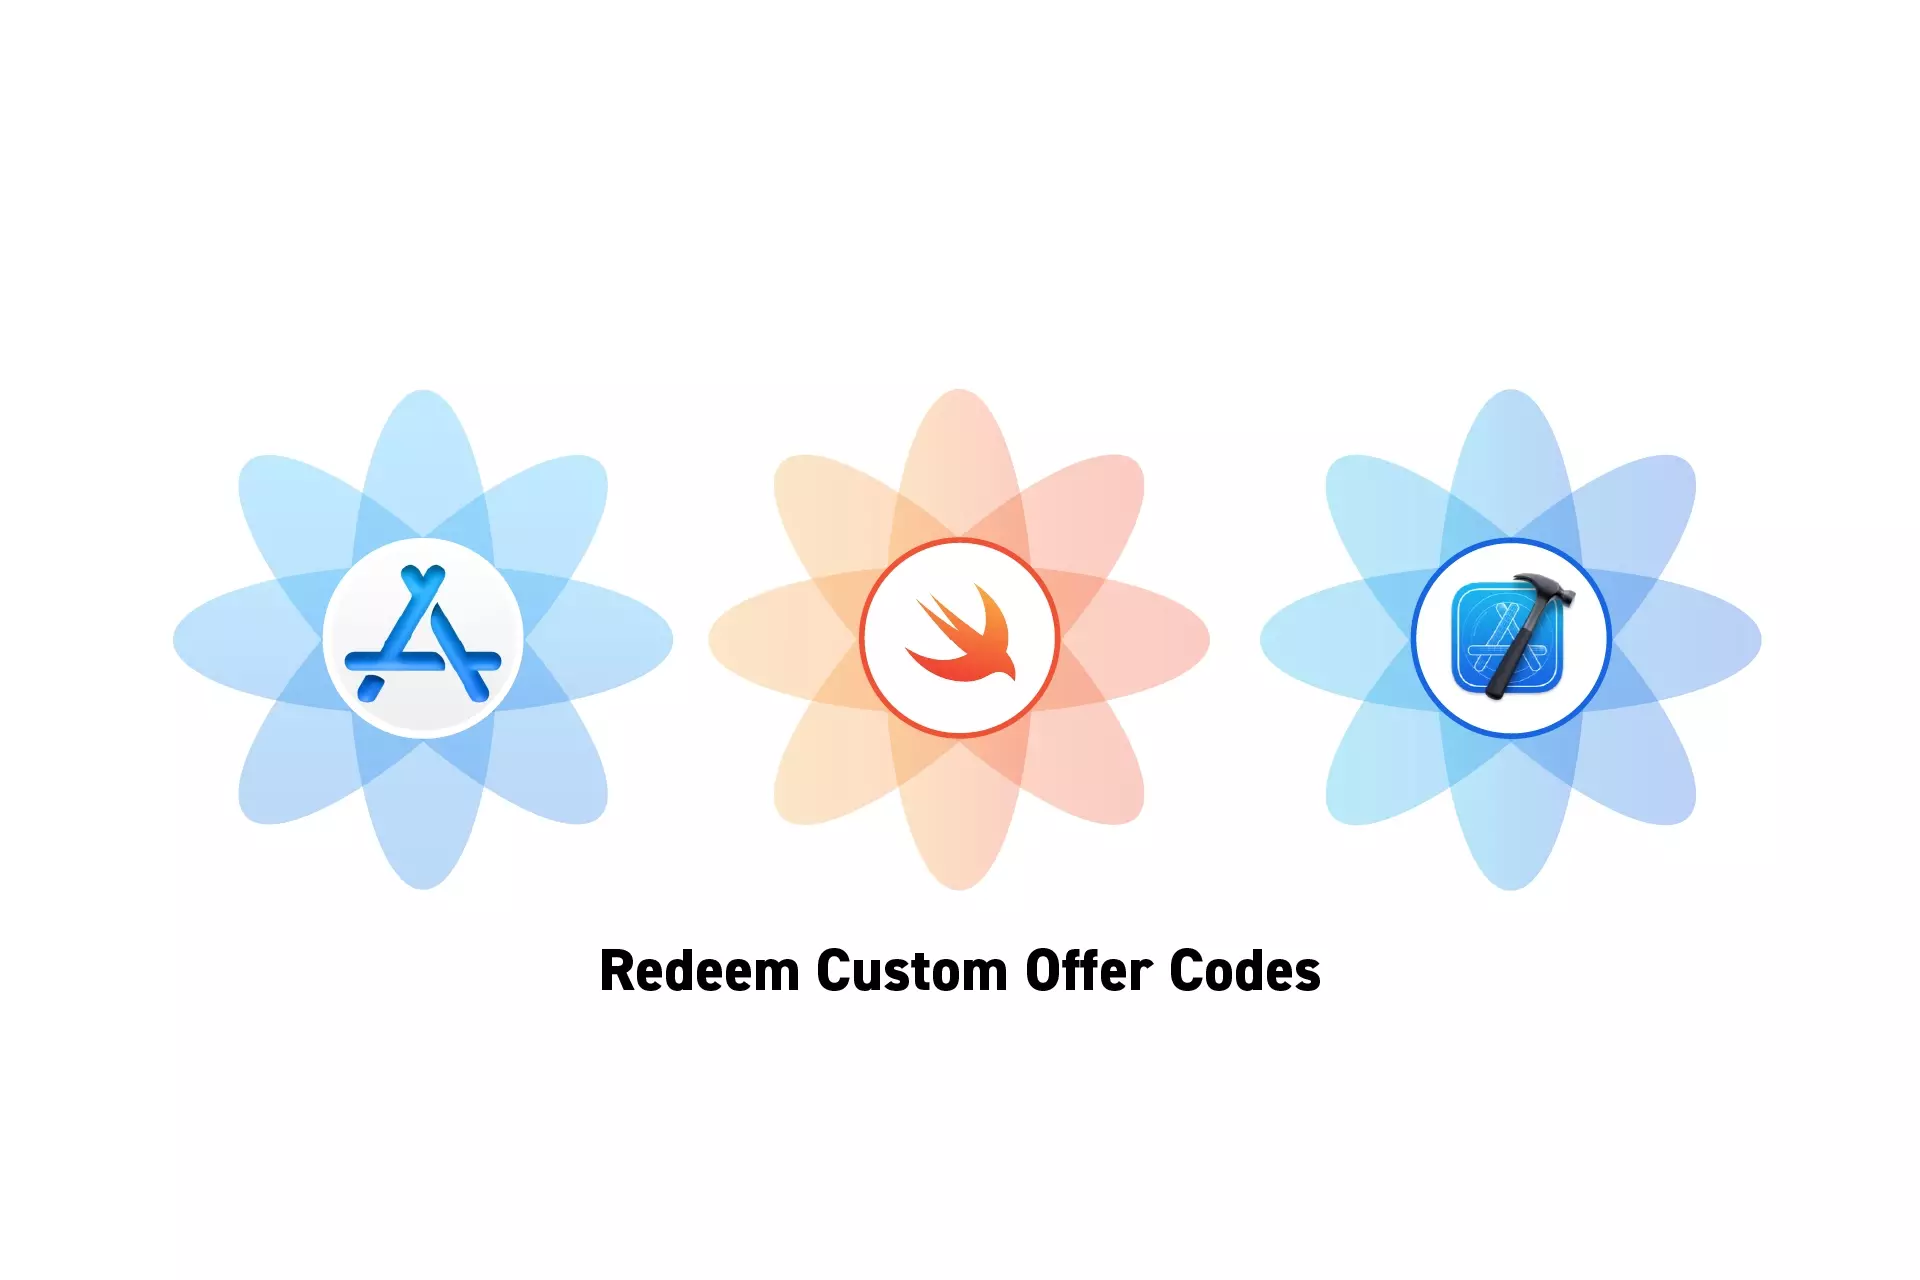 Three flowers that represent StoreKit, Swift and XCode side by side. Beneath them sits the text “Redeem Custom Offer Codes.”